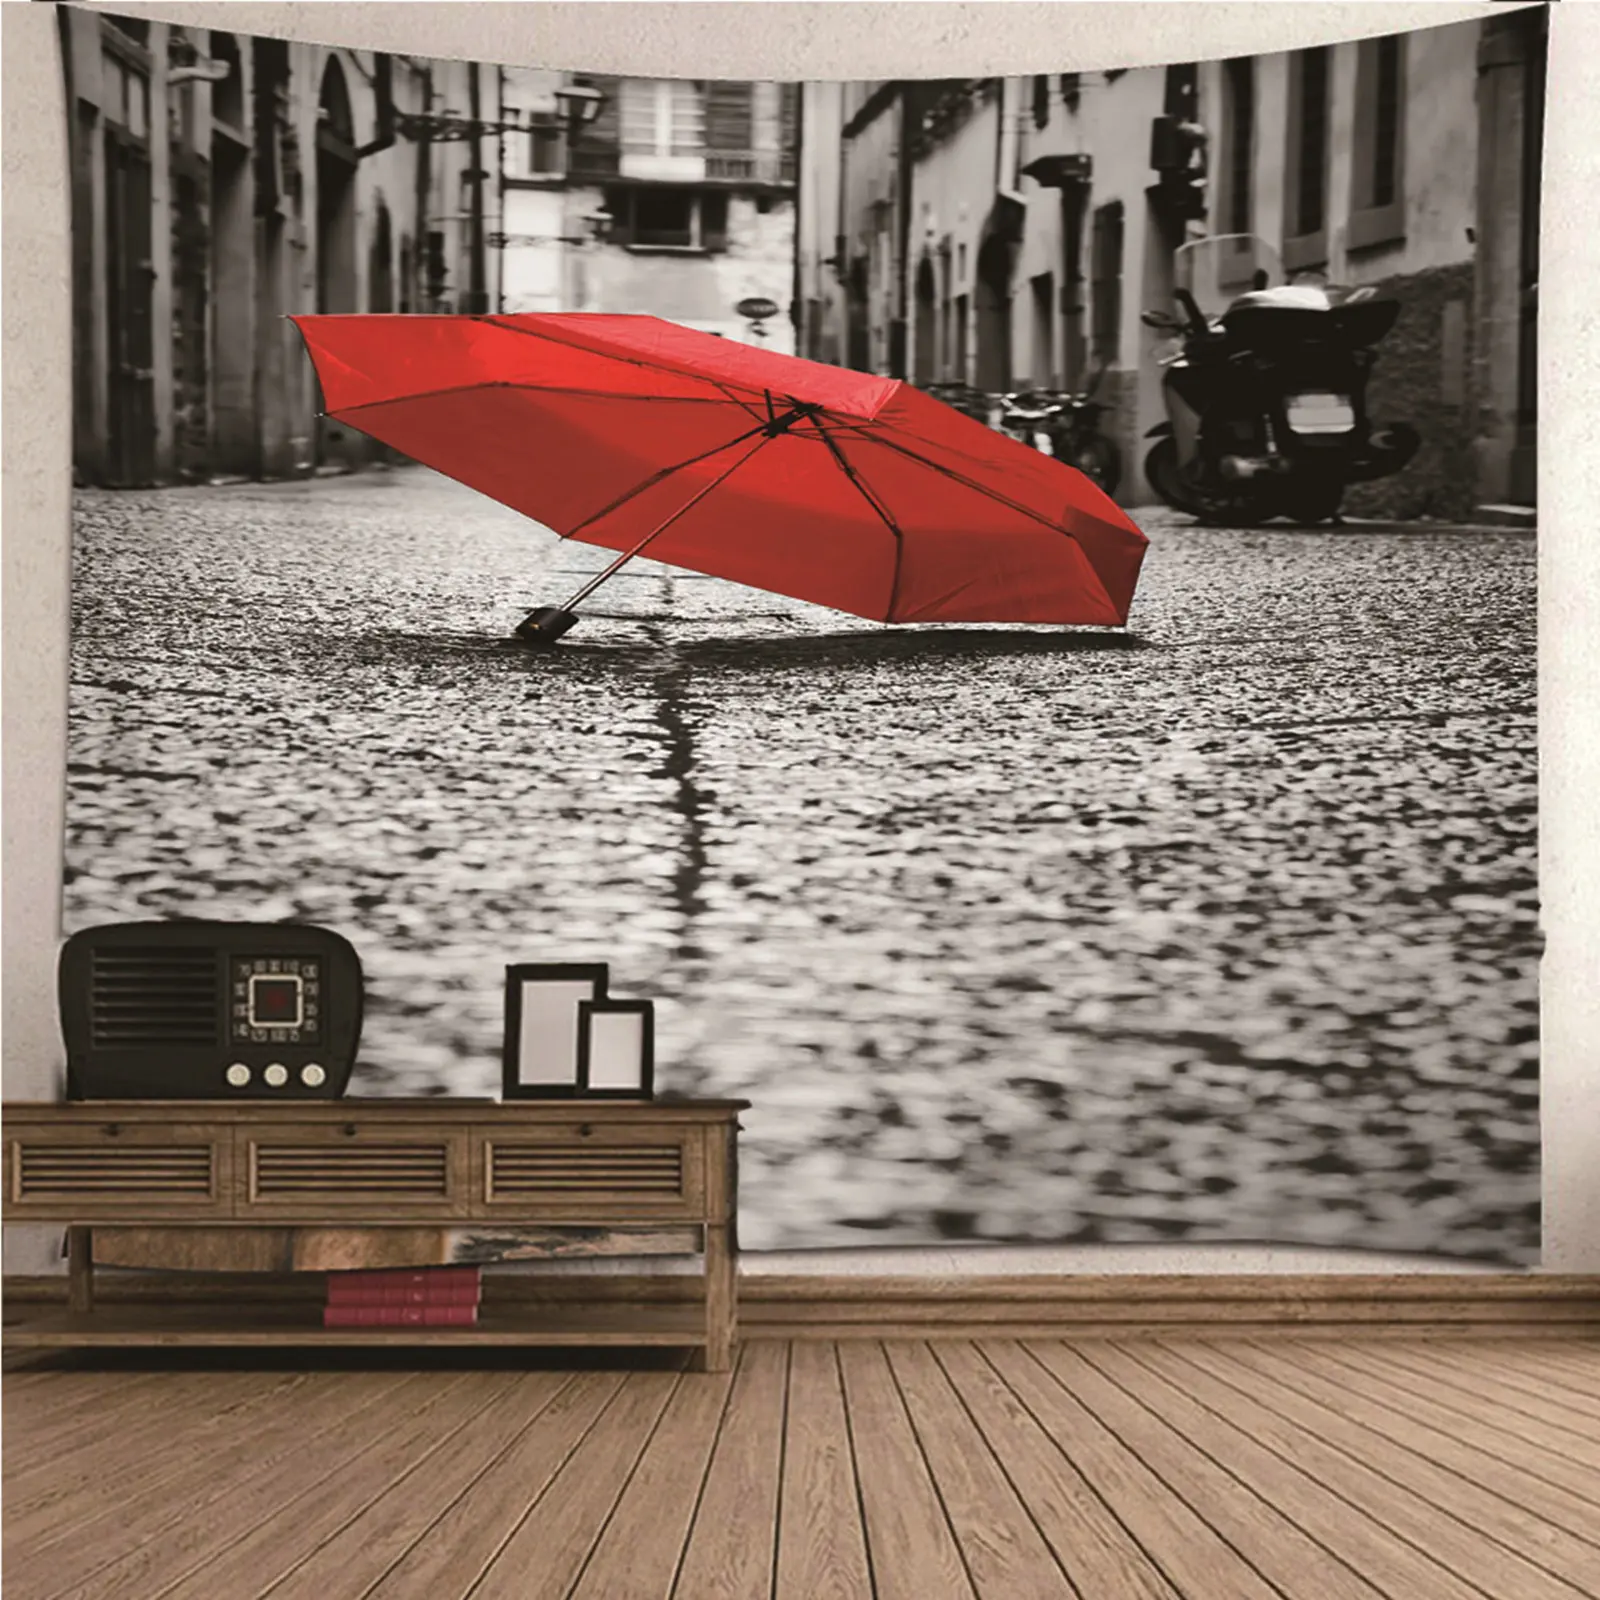 

King Tapestry Tapestries Designs Red Umbrella in the Alley Wall Hanging Blanket Dorm Art Decor Covering